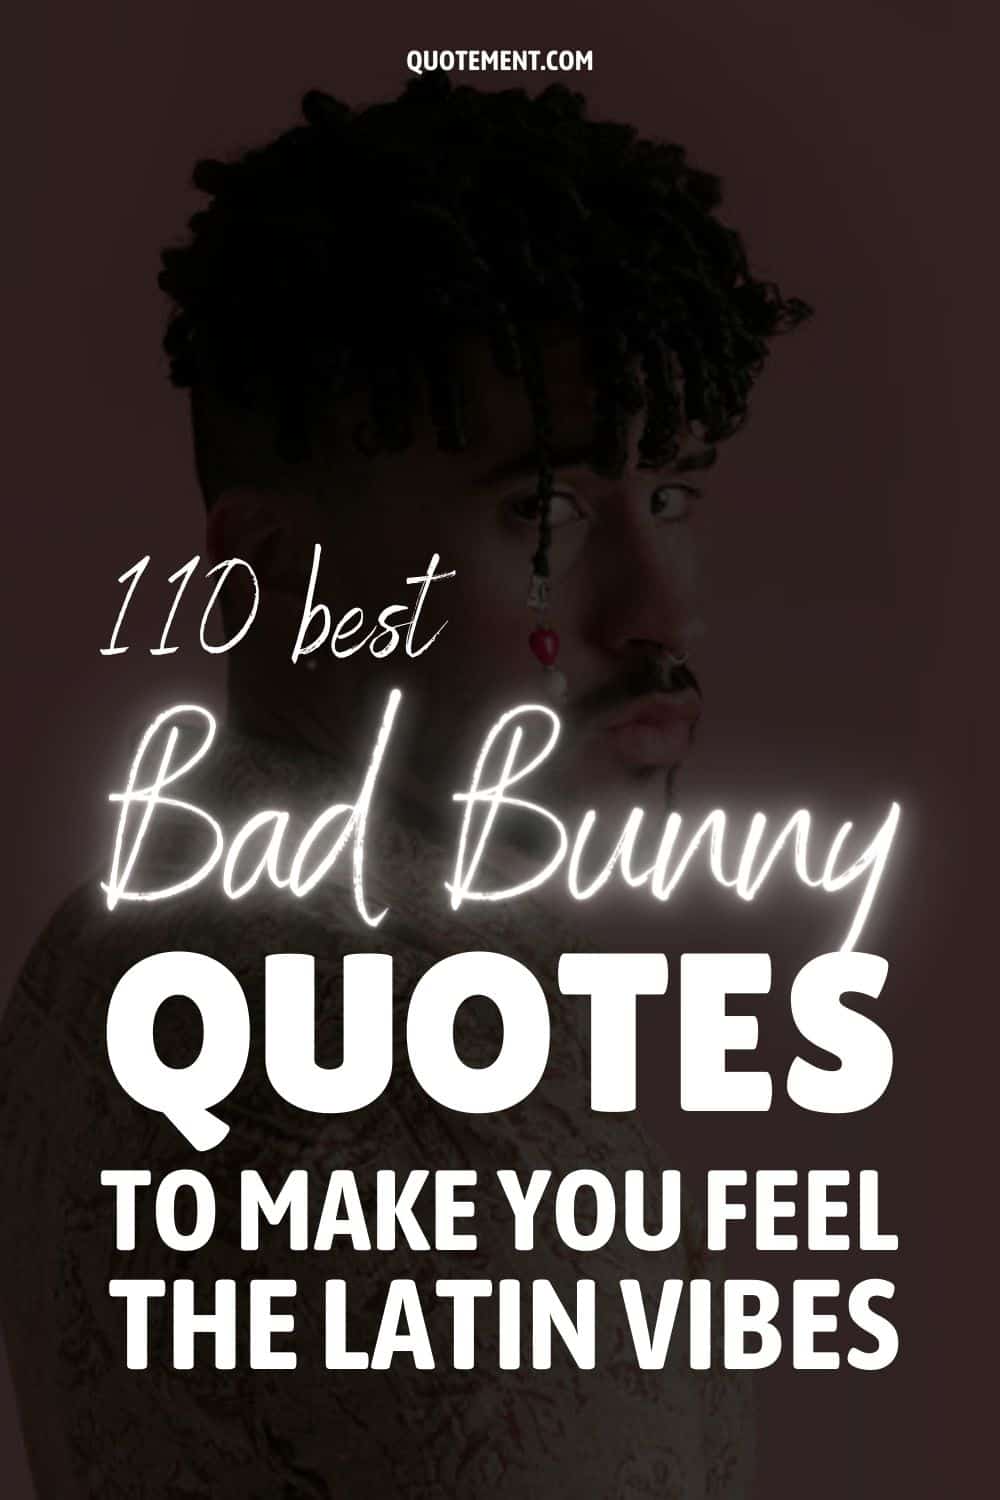 110 Best Bad Bunny Quotes To Make You Feel The Latin Vibes